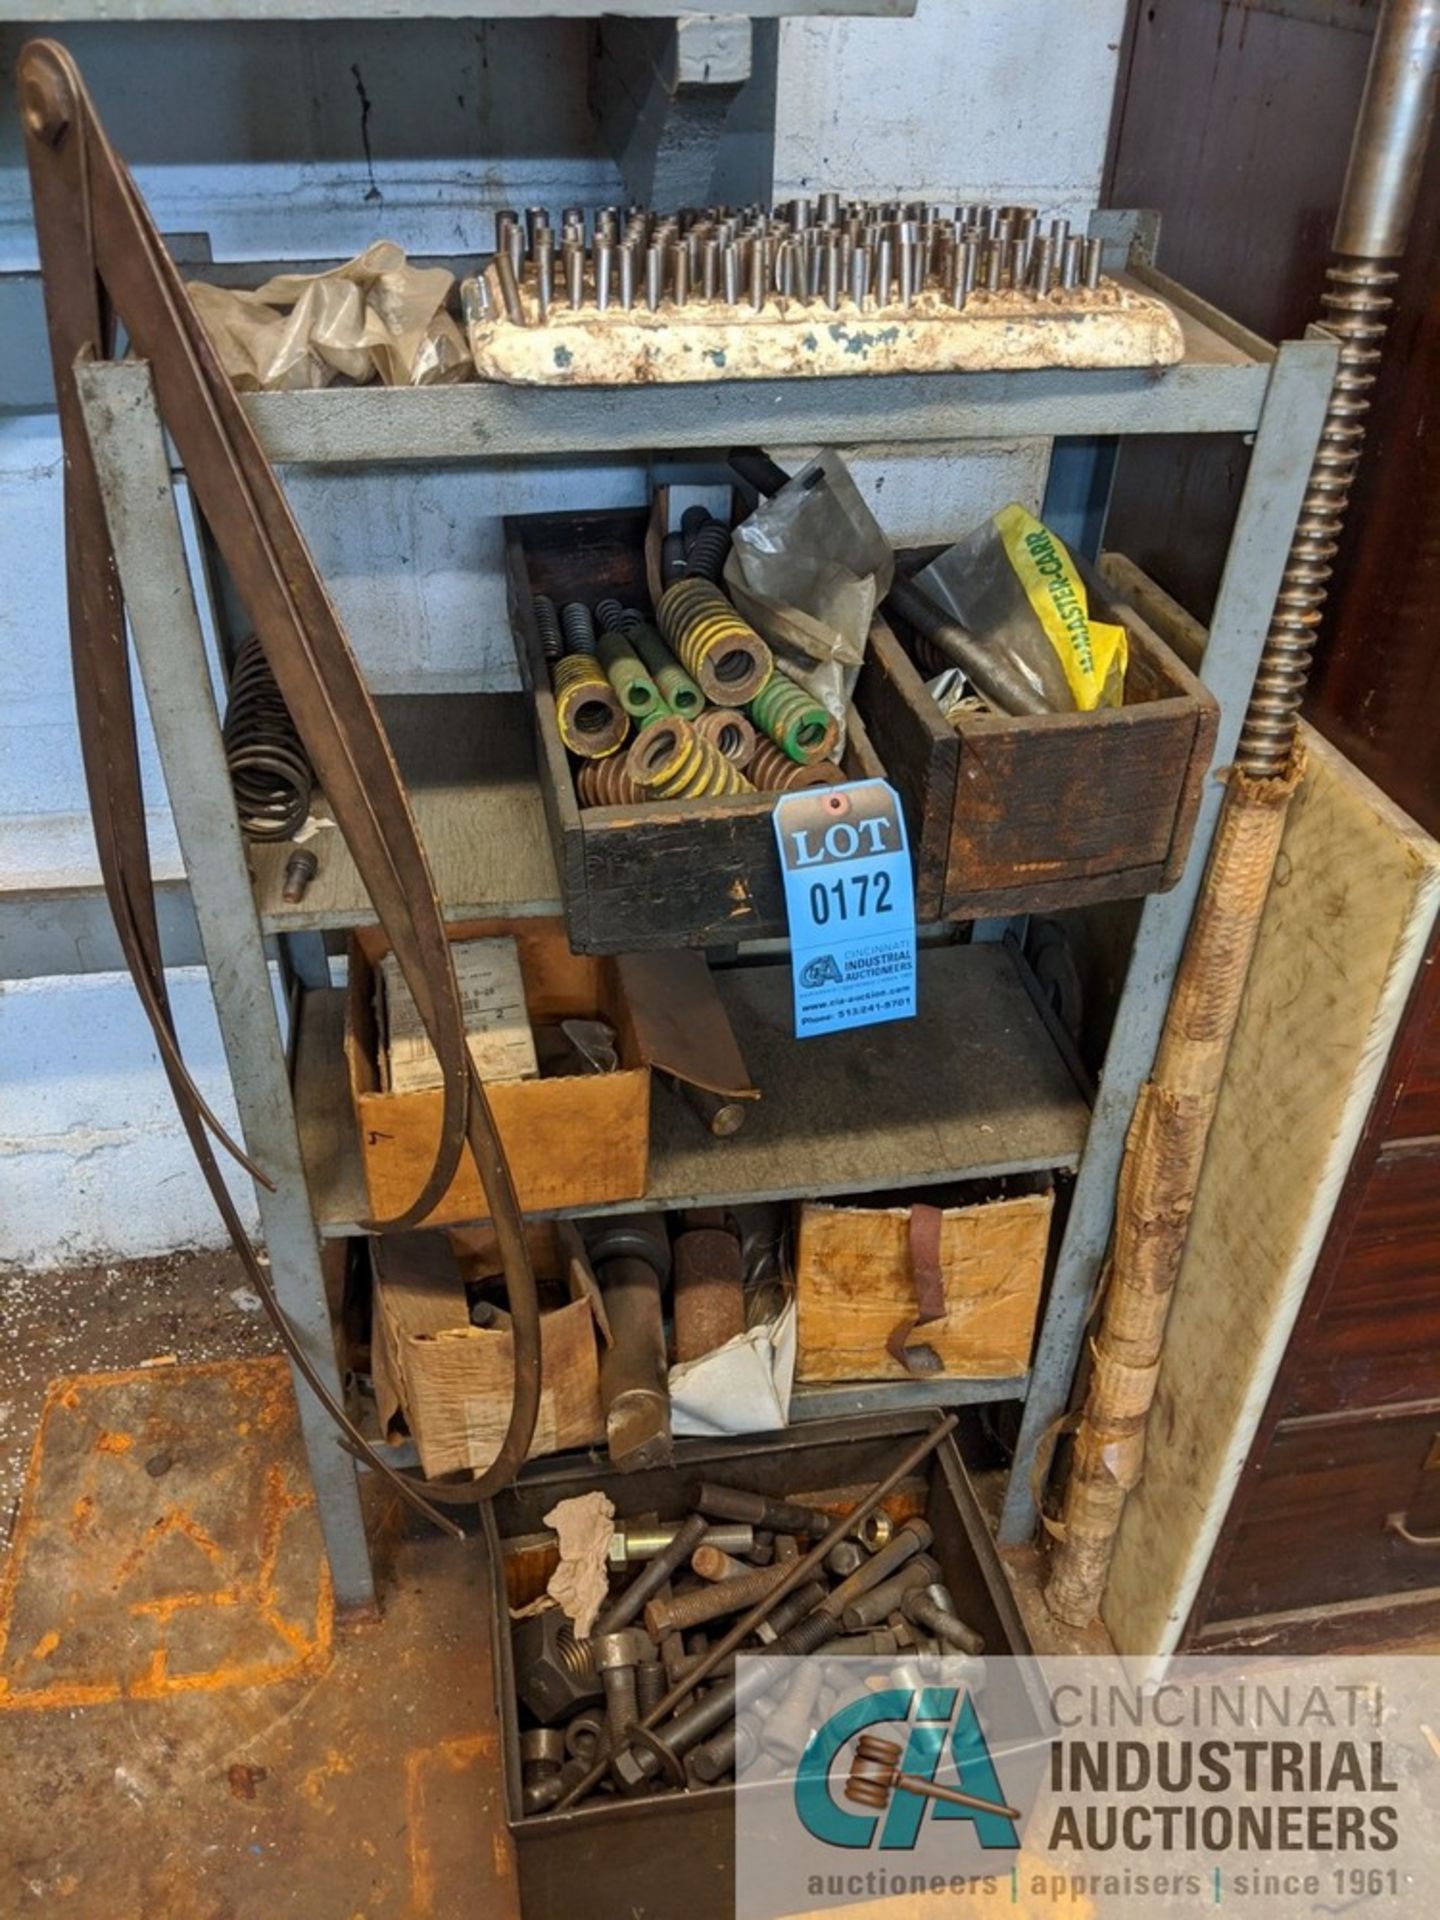 (LOT) RACK WITH SPRINGS, TOOLING, AND HARDWARE ON FLOOR AND MACHINE PARTS ON LOWER WOOD SHELF UNIT